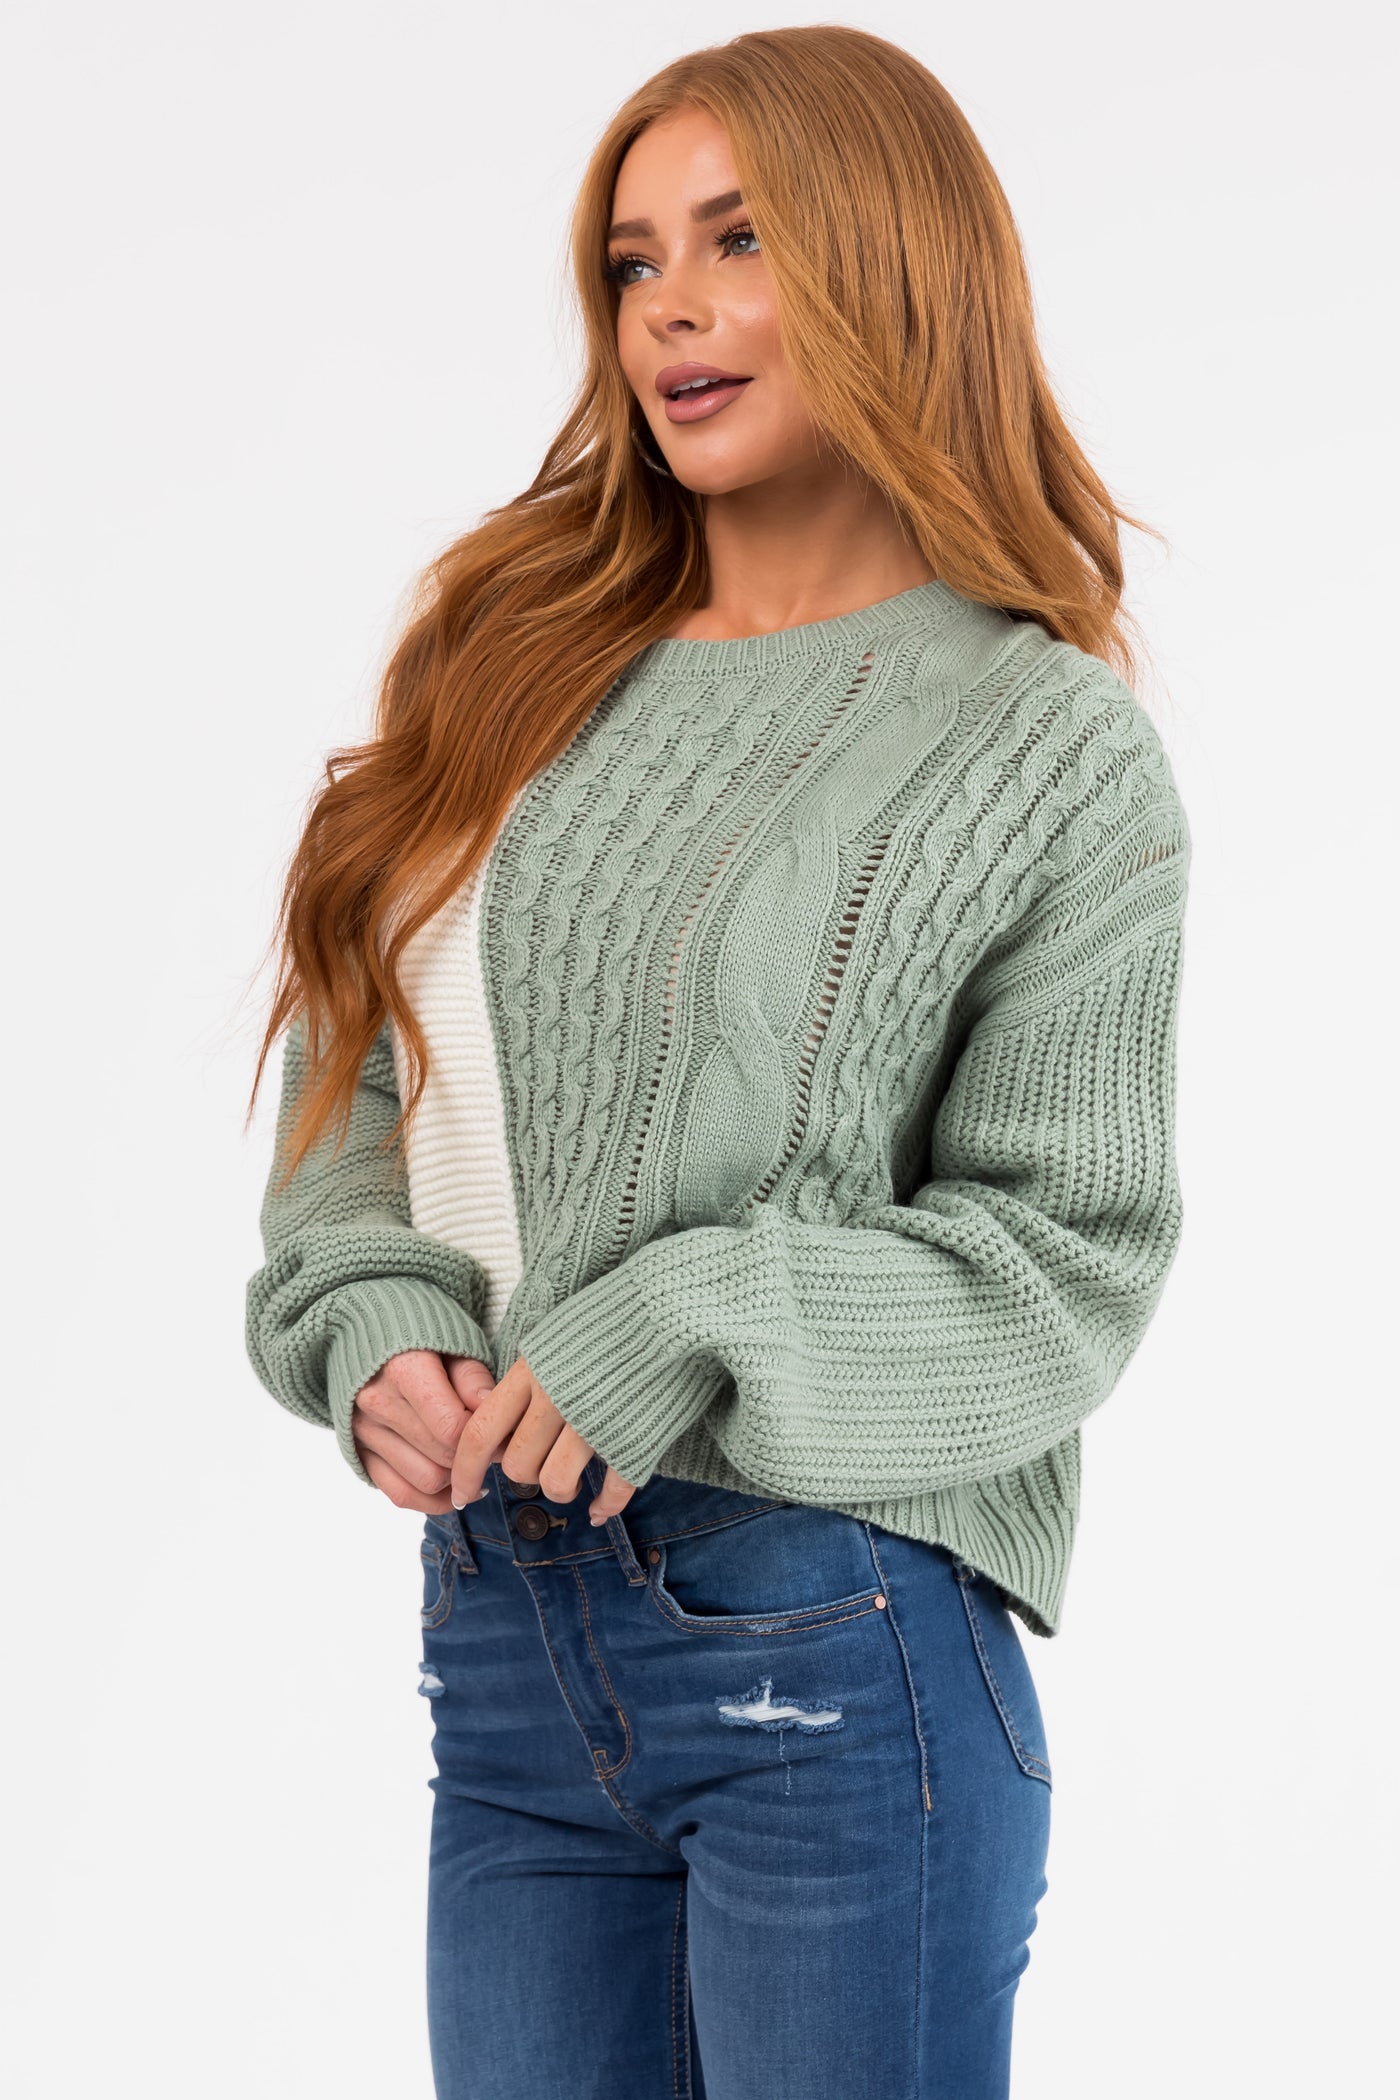 Sage and Ivory Colorblock Cable Knit Sweater